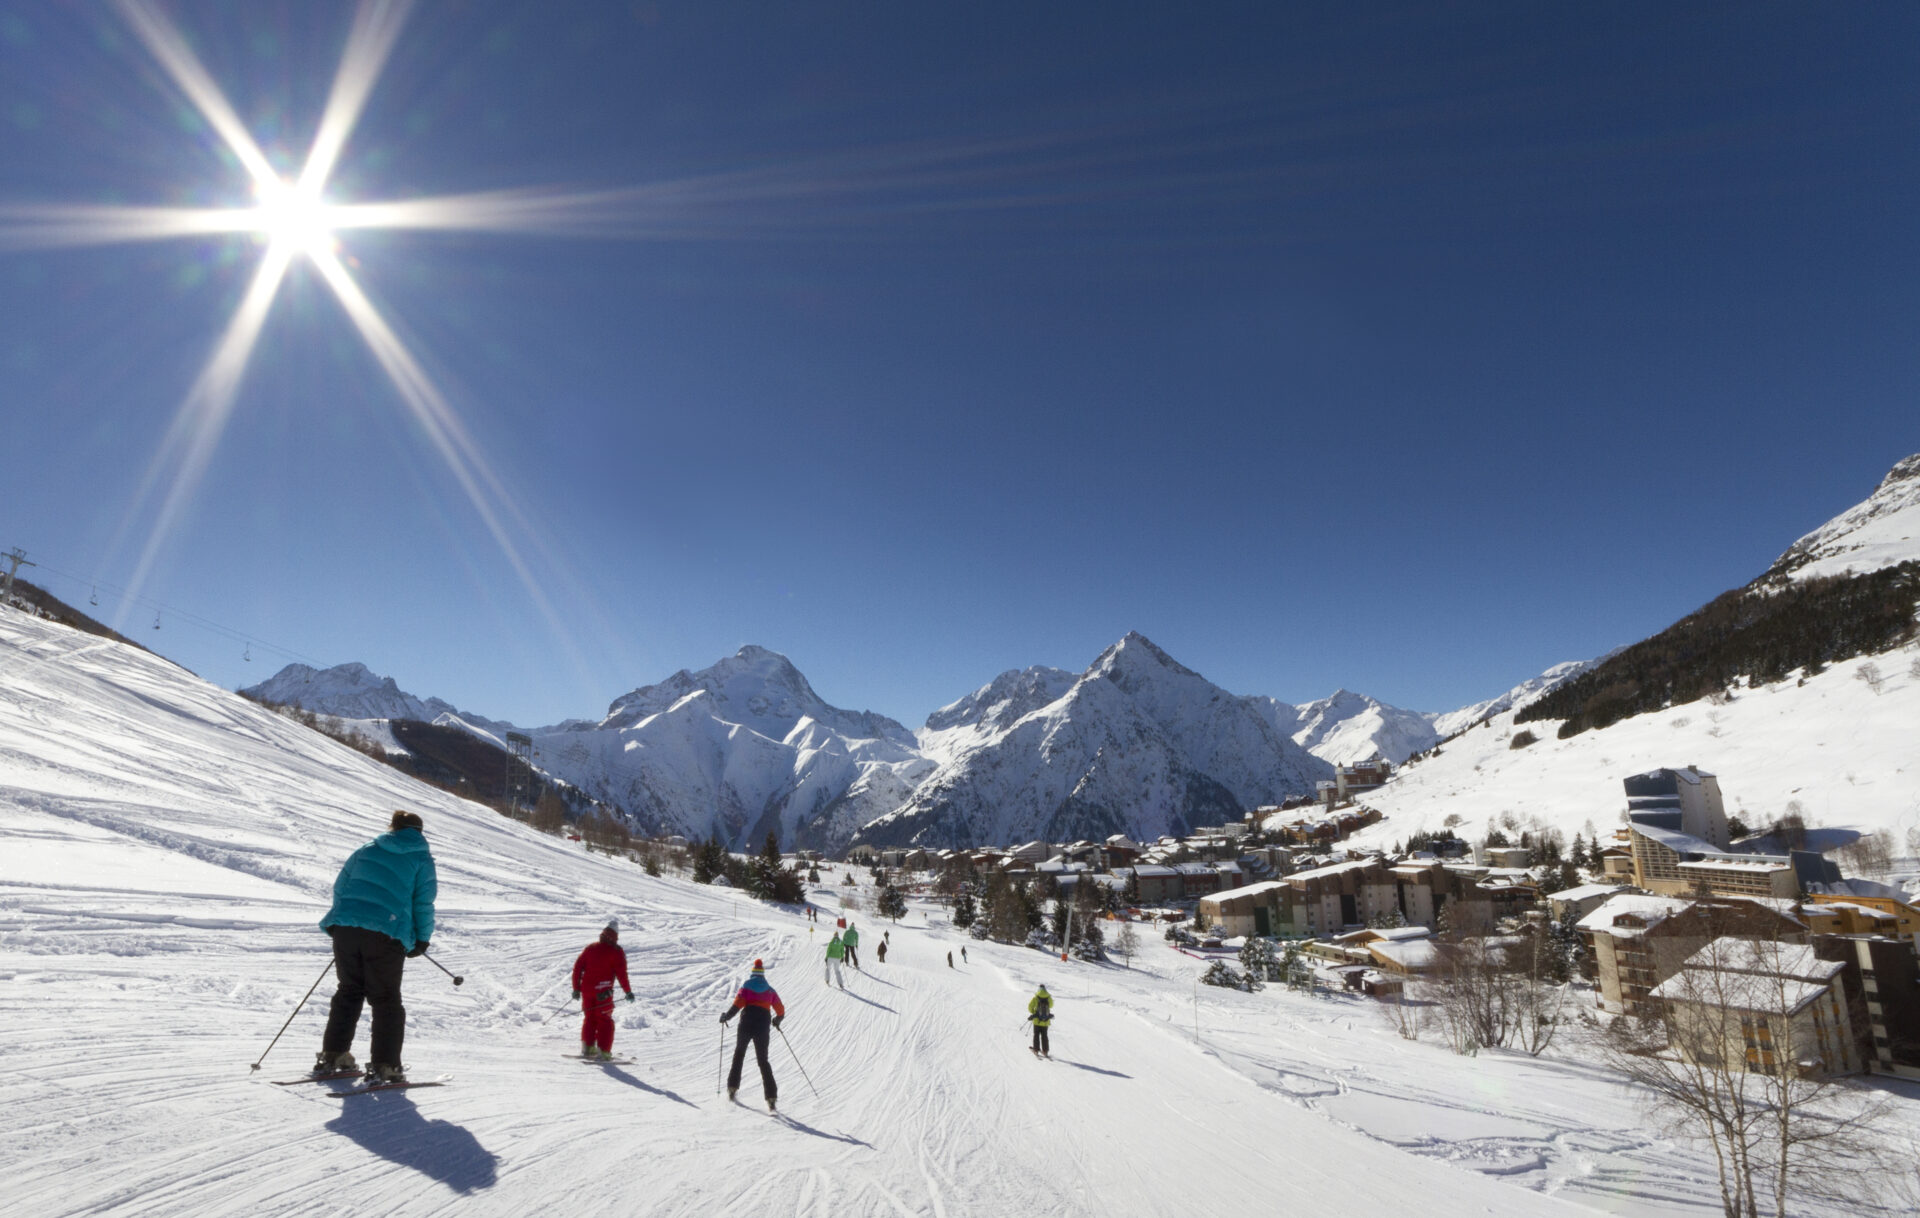 An image of the pistes in Les Deux Alpes